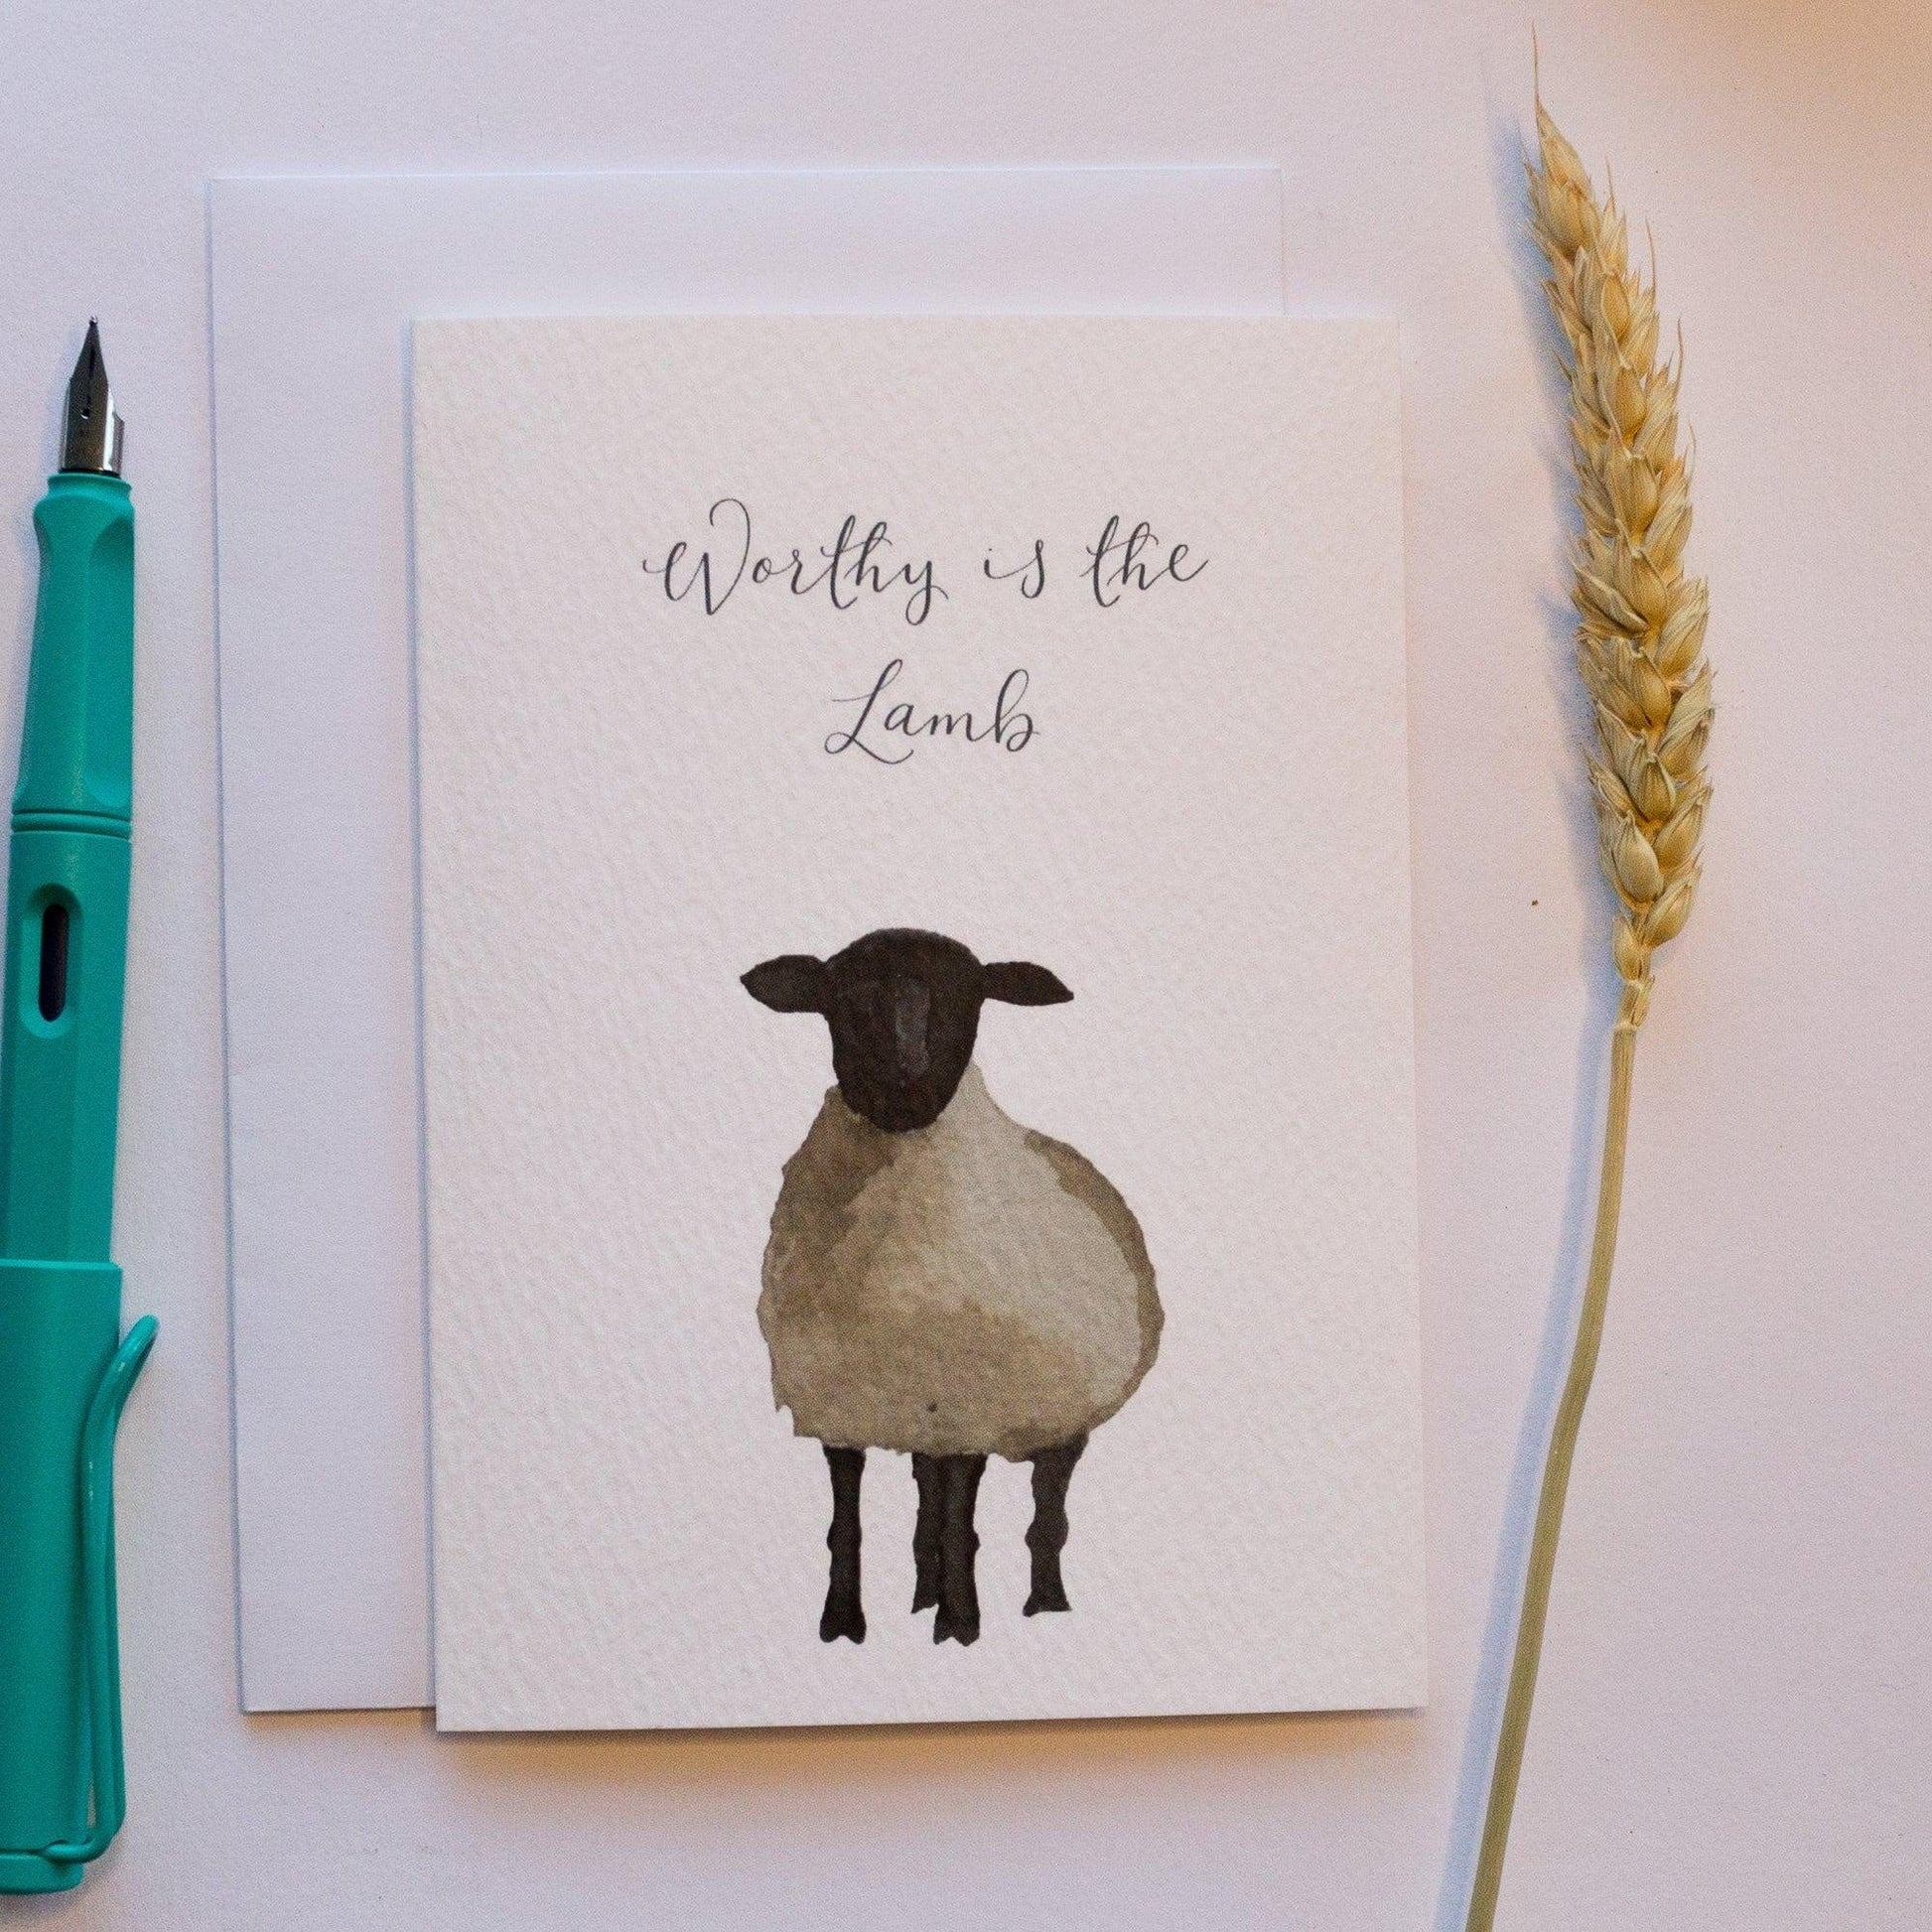 And Hope Designs Greeting & Note Cards Single card Easter Worthy is the Lamb card